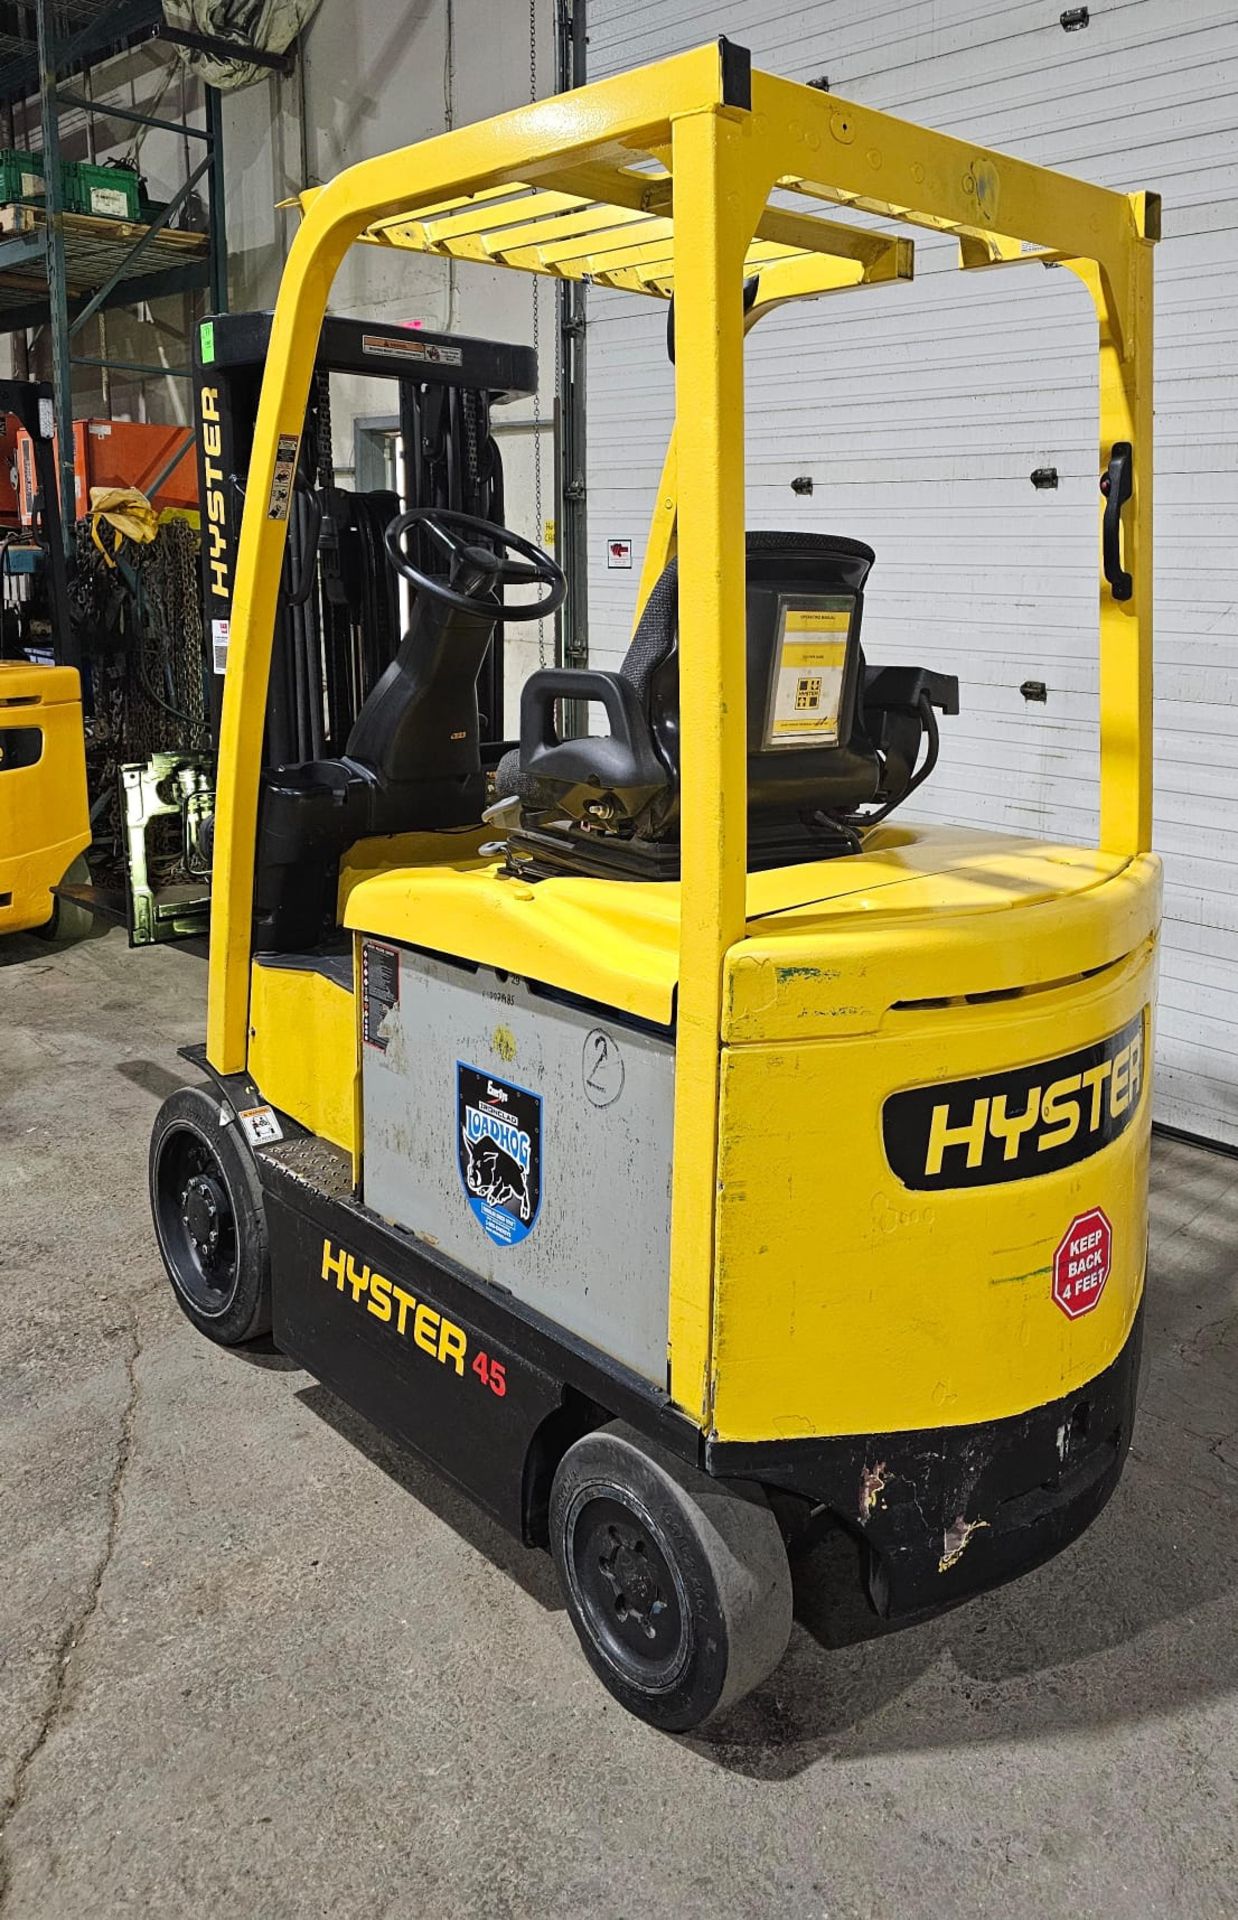 2015 Hyster 4,500lbs Capacity Forklift Electric 48V with sideshift & 3-STAGE MAST 189" load height - Image 2 of 5